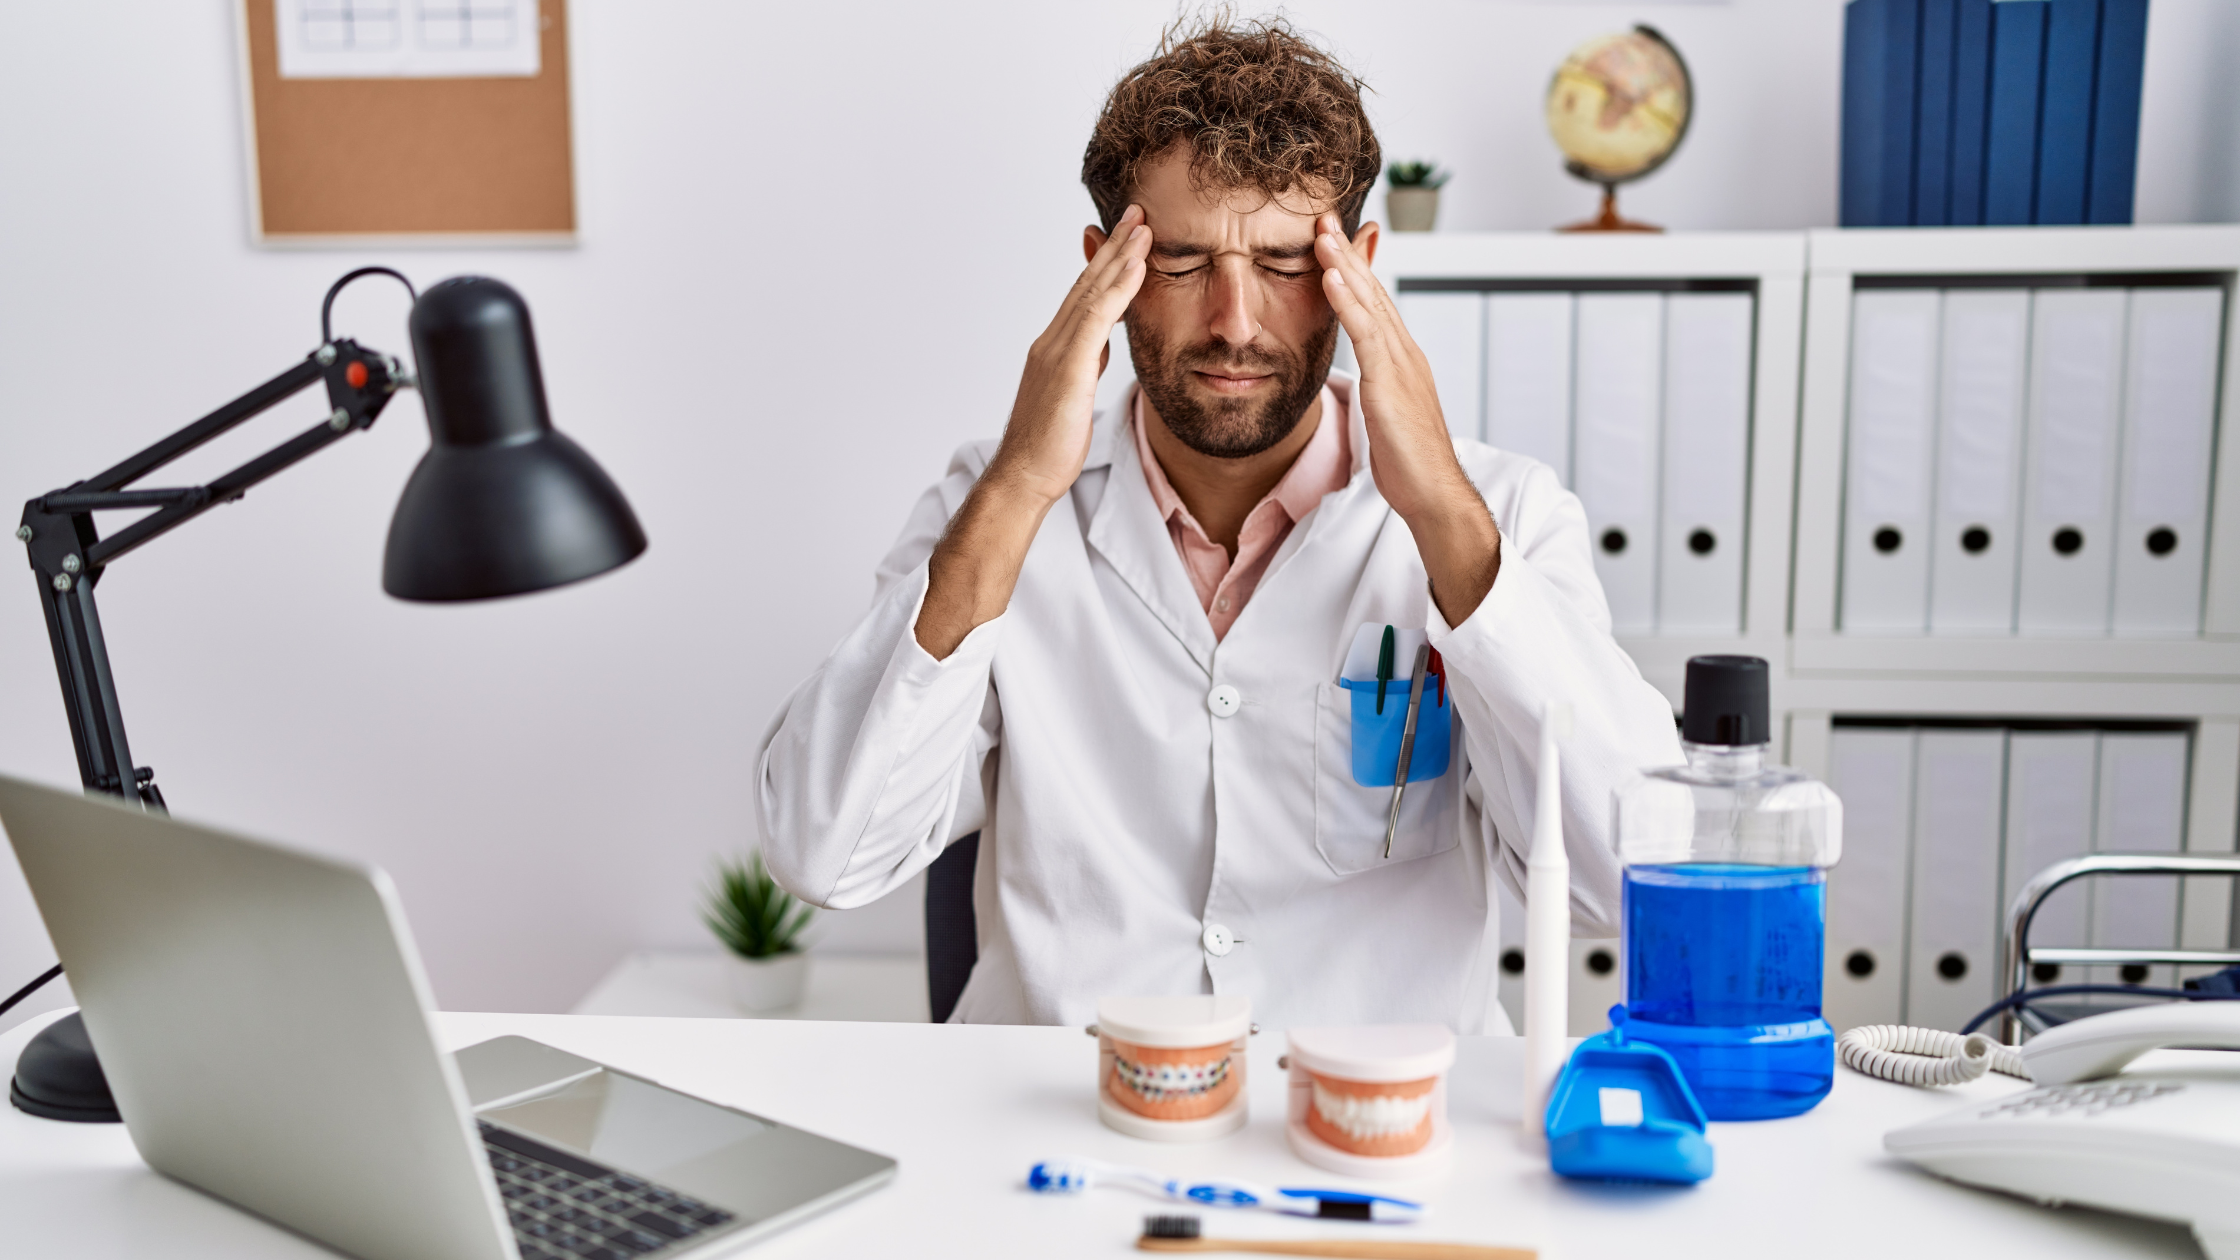 Why is Dentistry a Stressful Job?